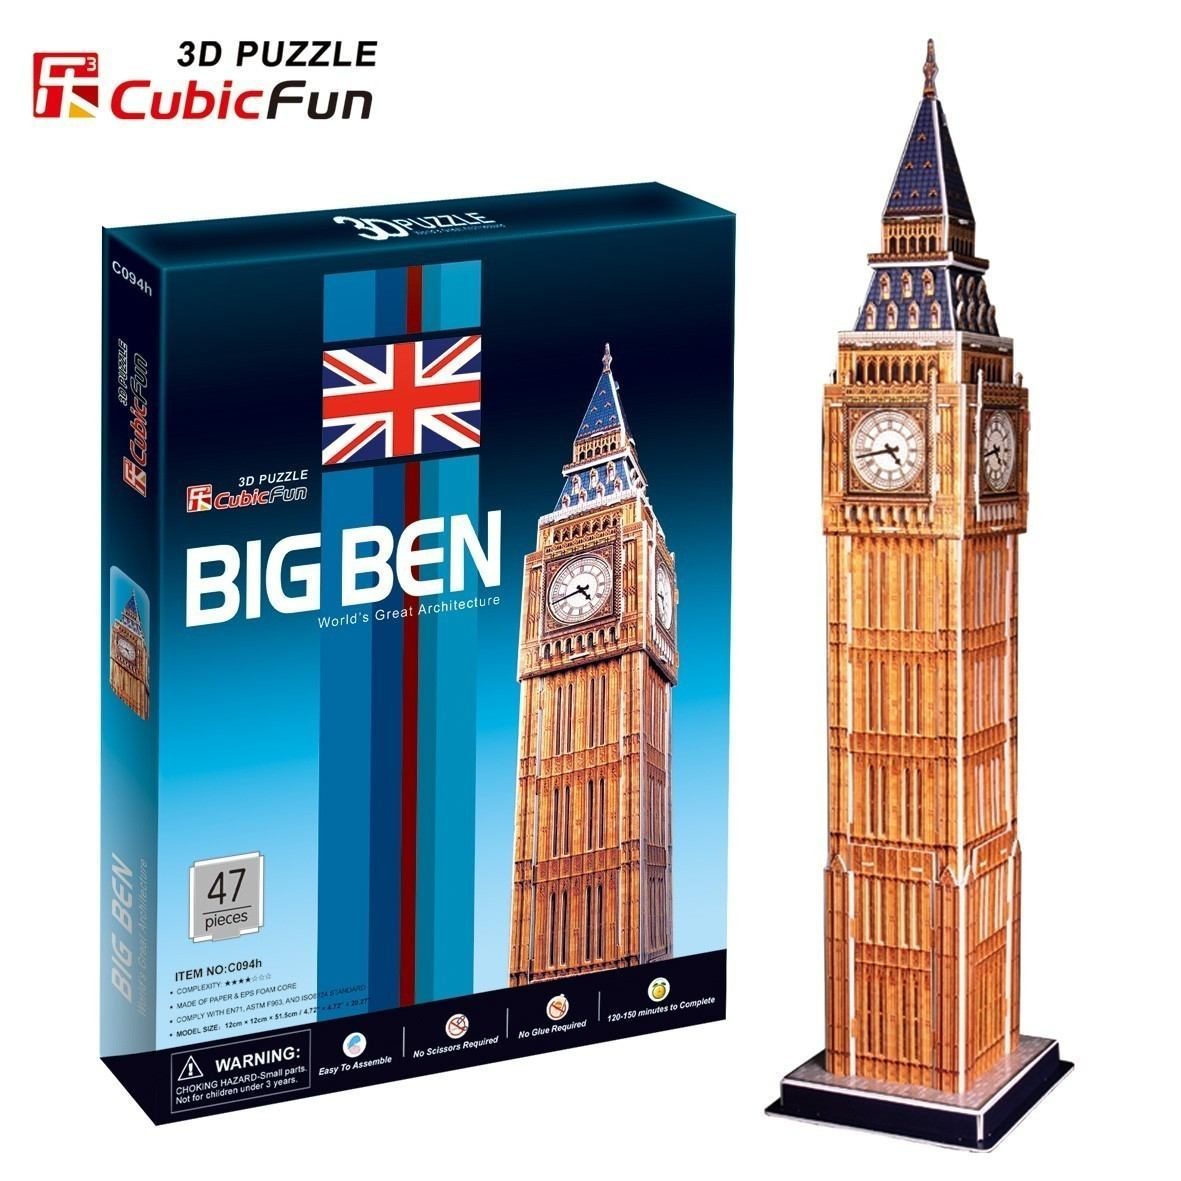 Puzzle 3D Big Ben, Londýn, Anglicko